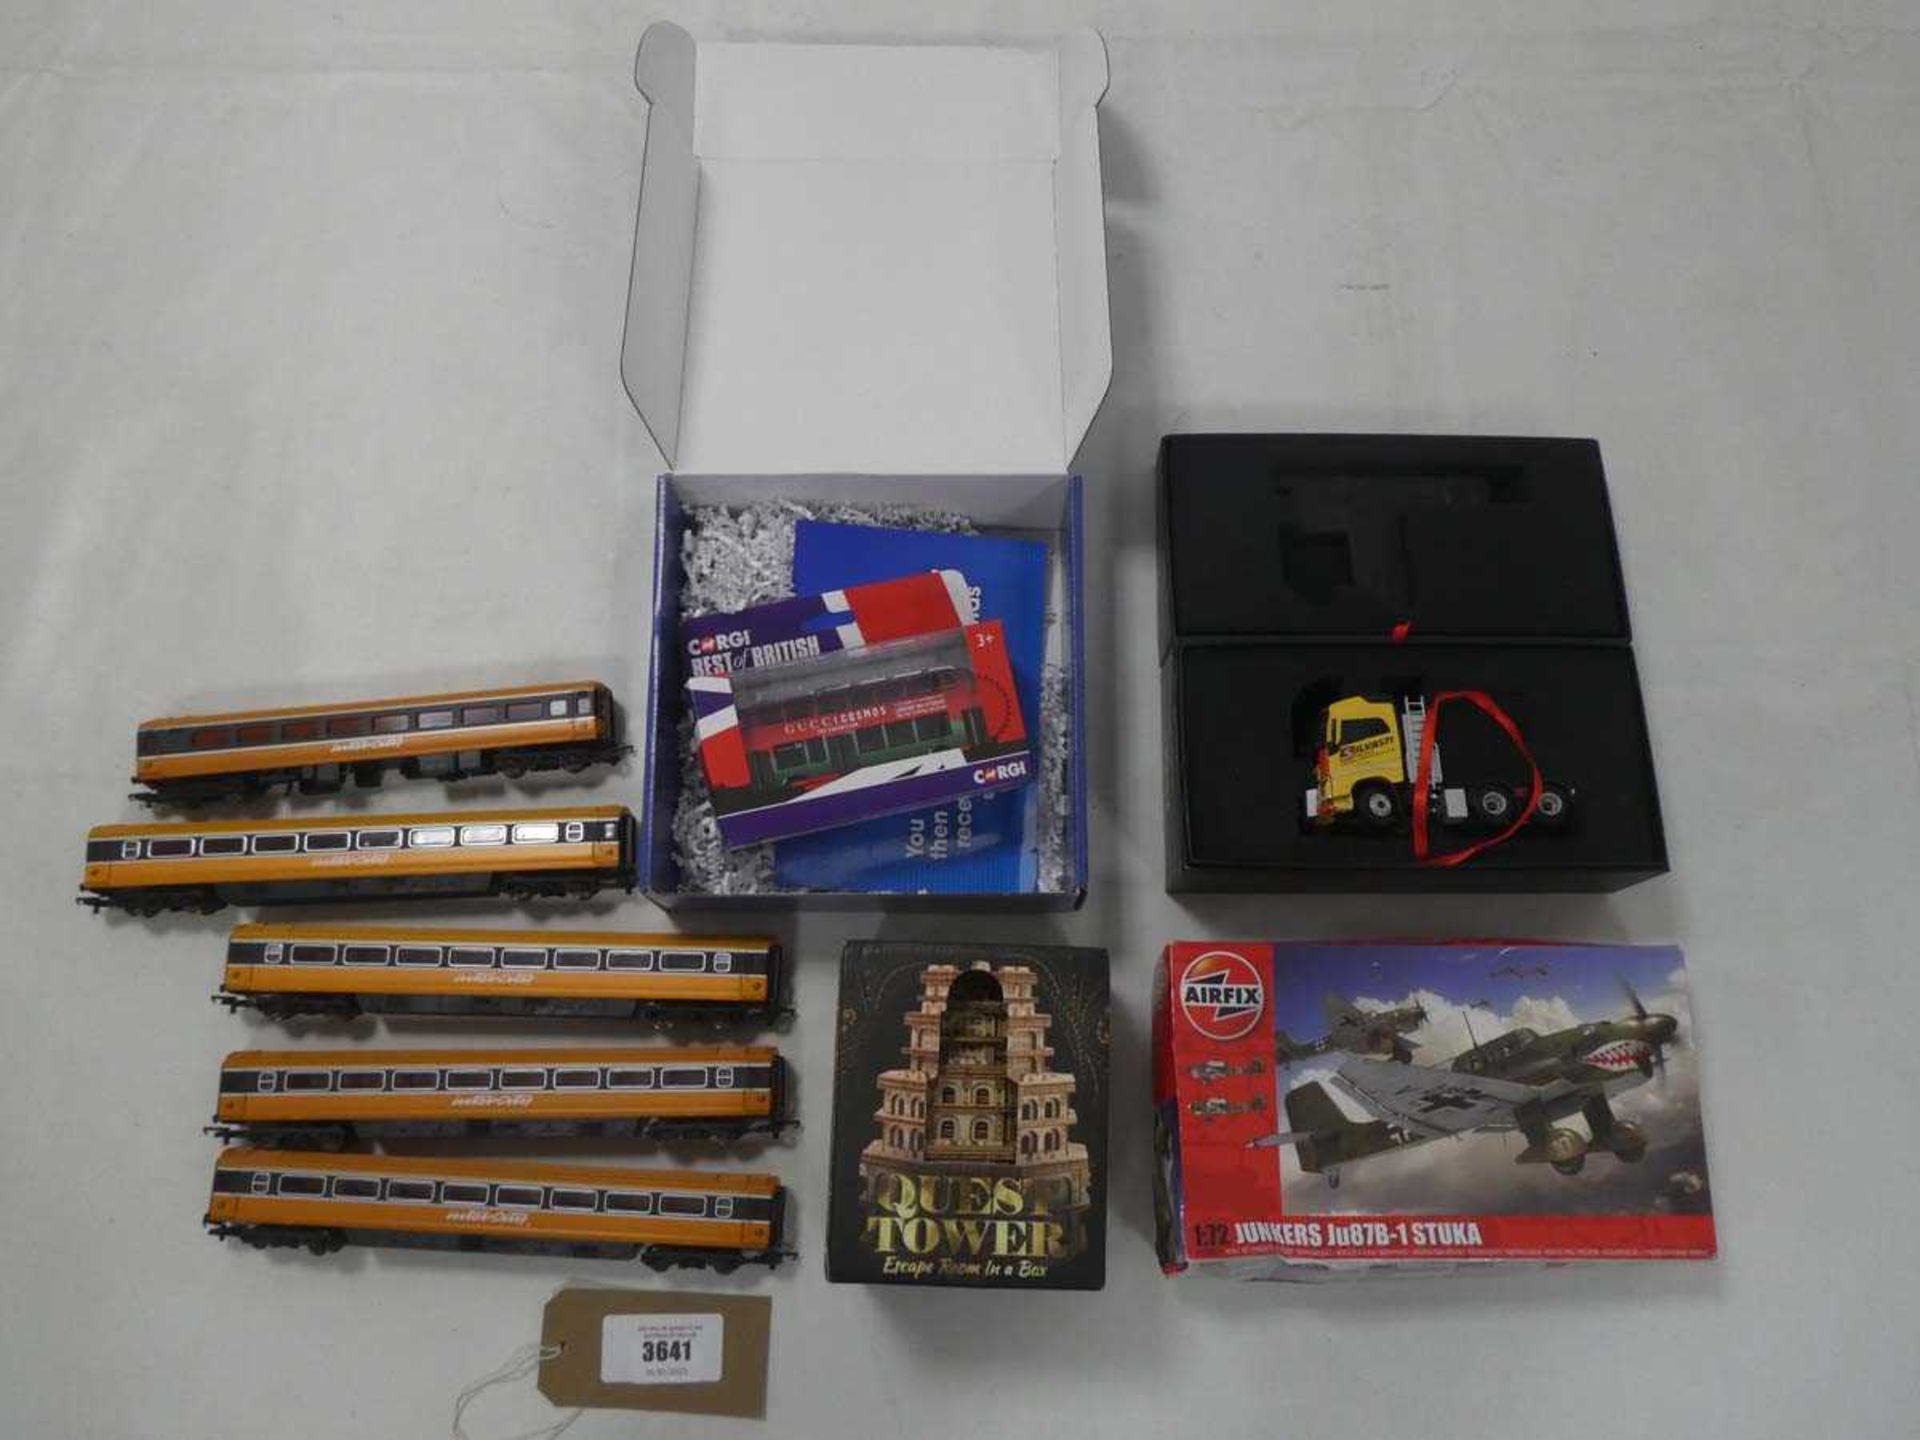 +VAT Selection of toys to include airfix model, Quest Tower, Corgi toy, etc